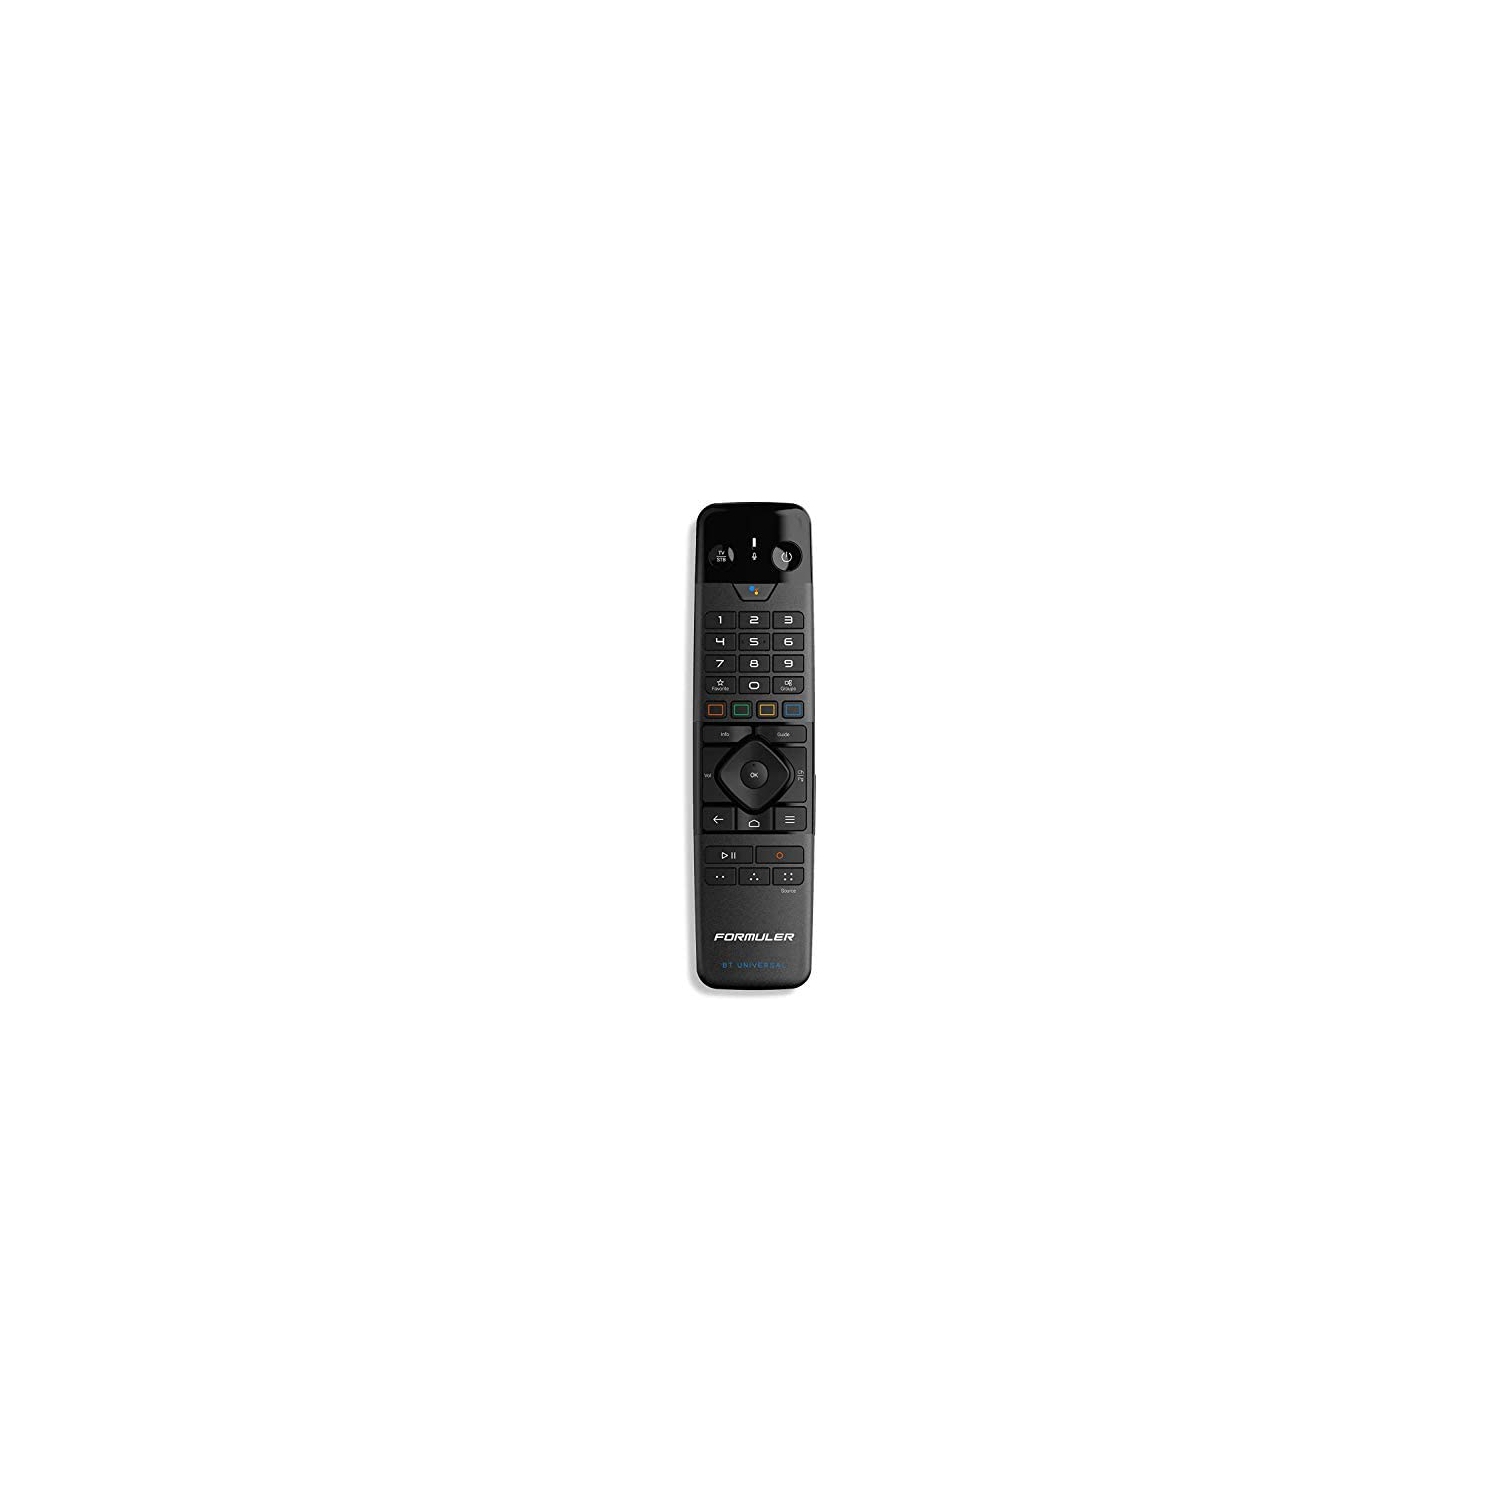 FORMULER GTV-BT1 Bluetooth Voice Control Remote Control High End Compatible with All TVs